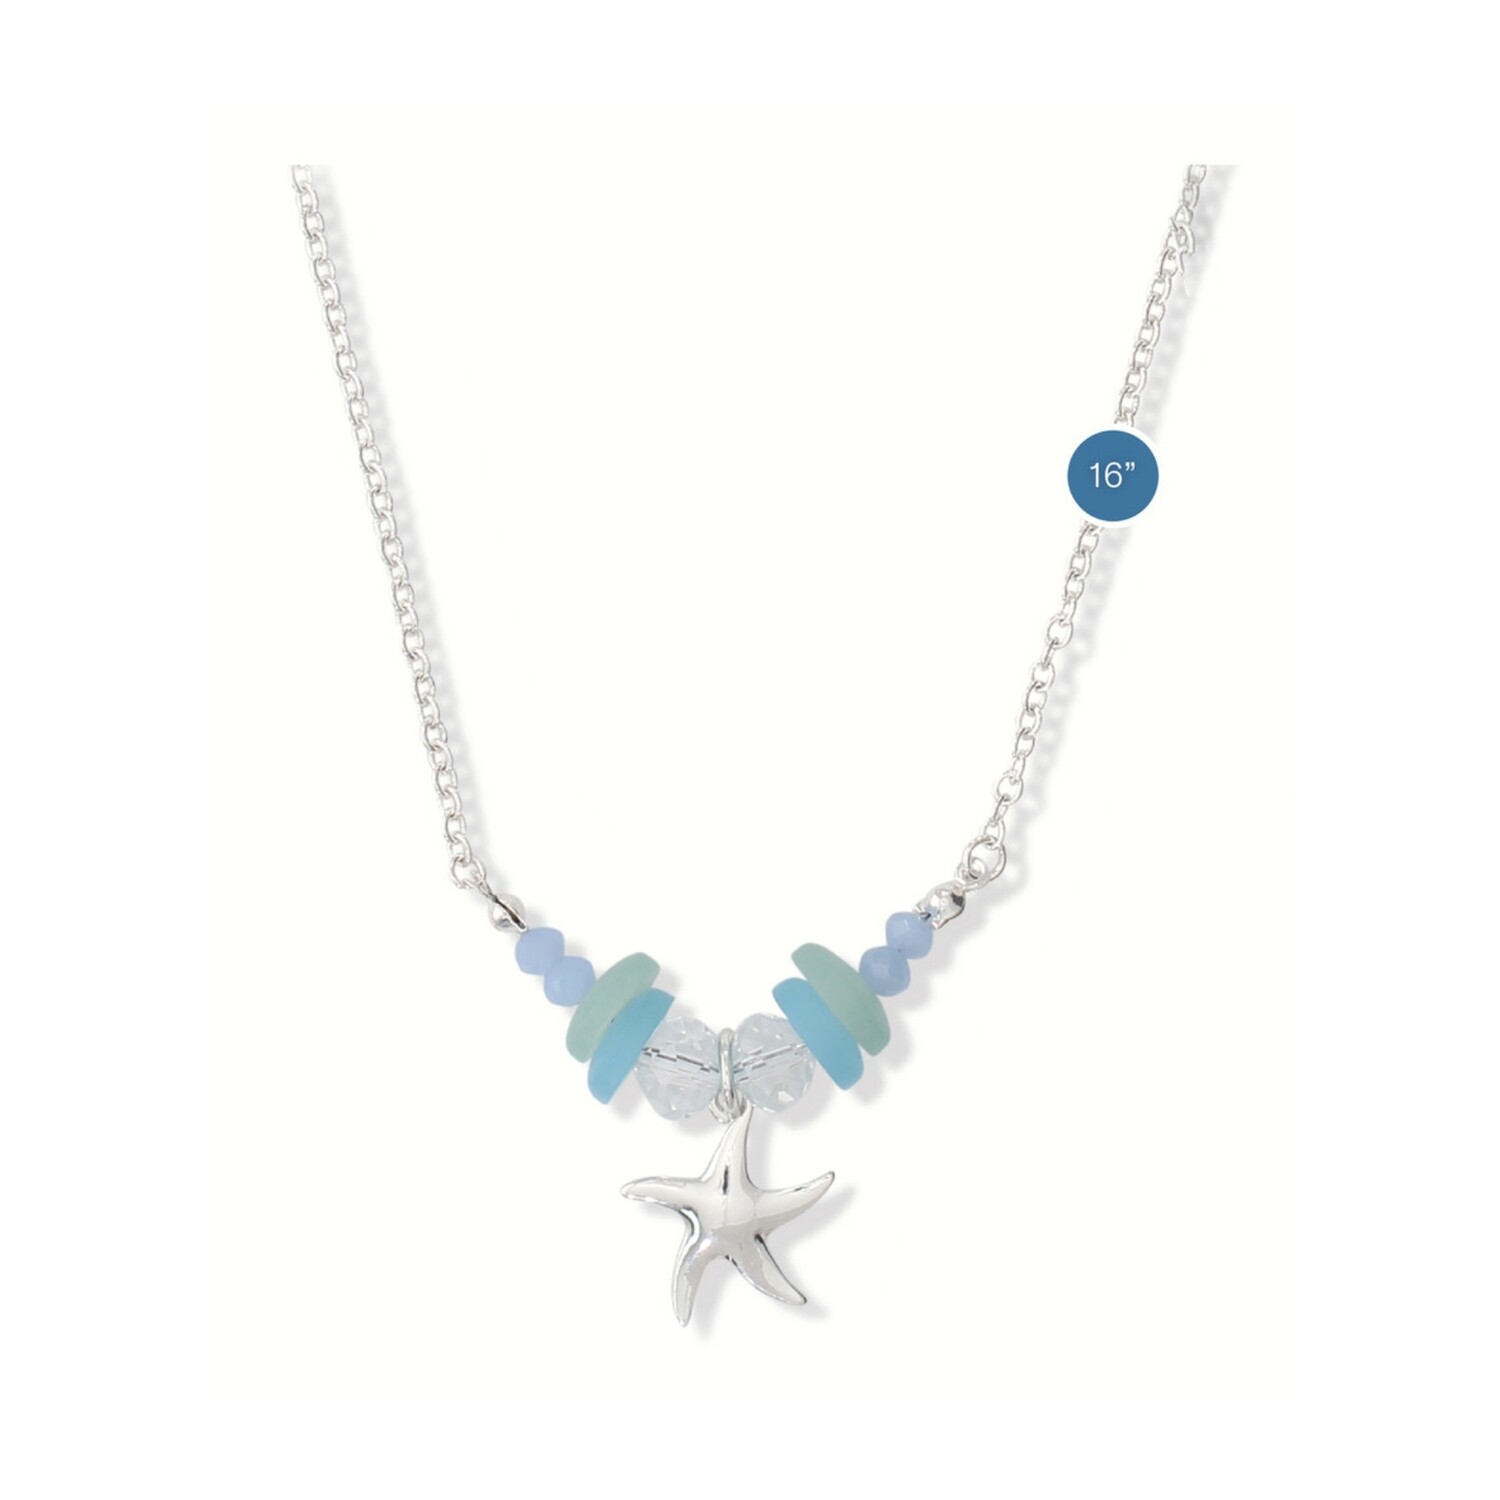 Necklace-Seaglass Silver Starfish Drop